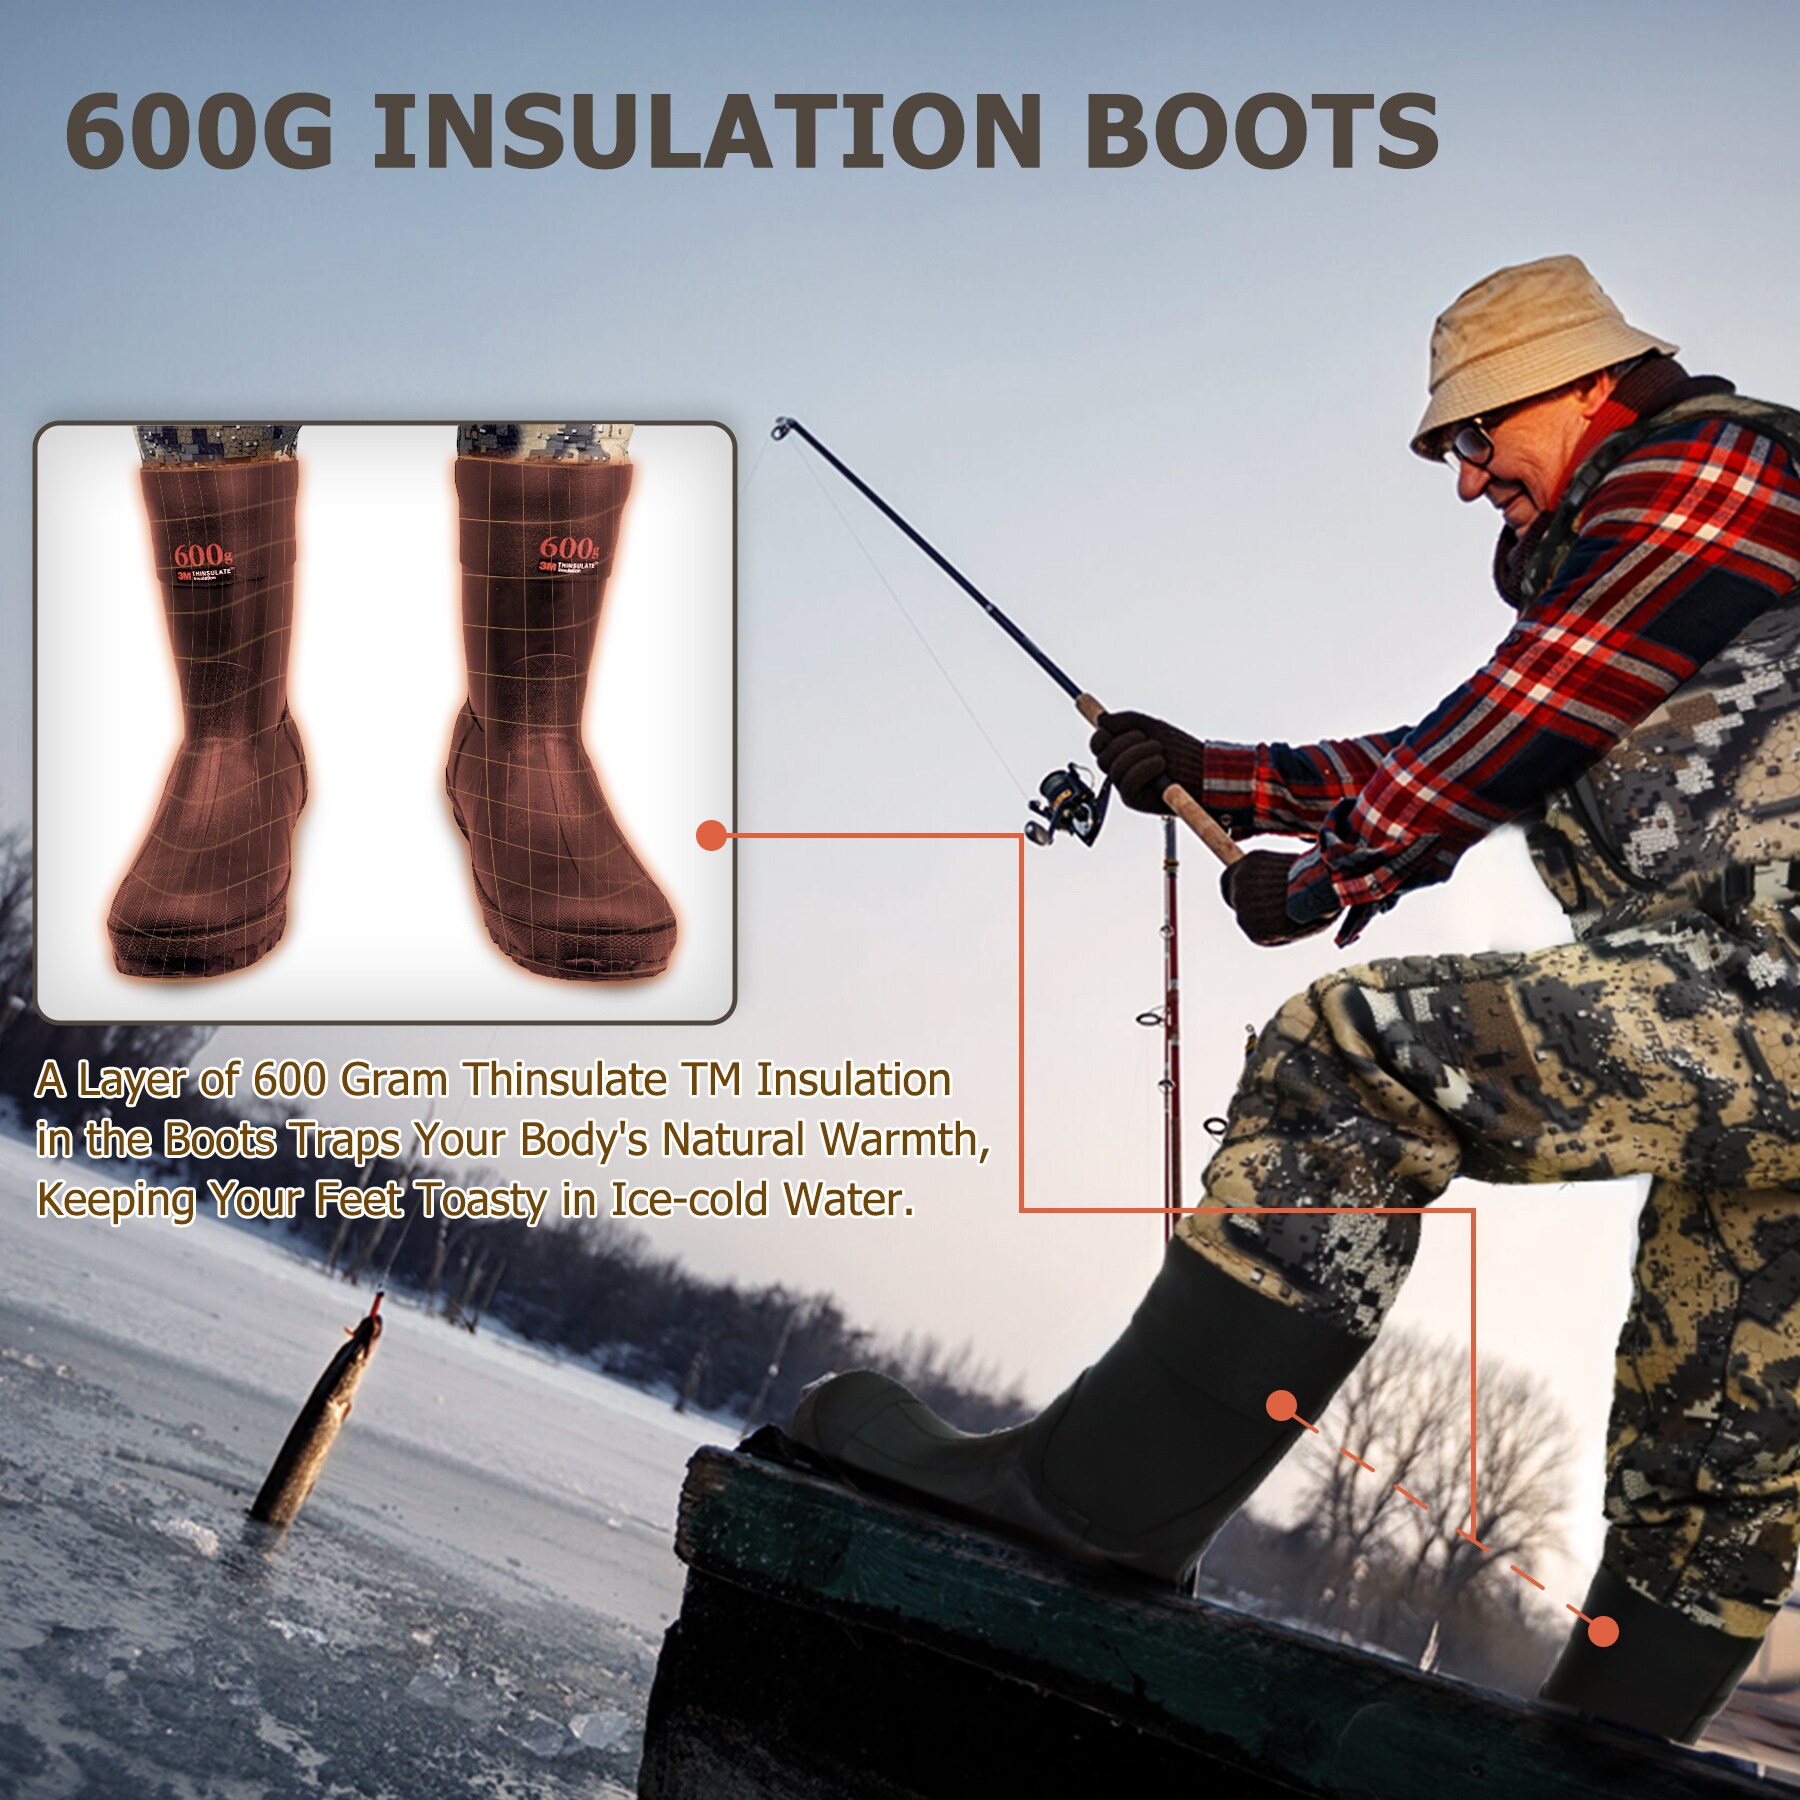 CAMOZONE Neoprene Chest Waders with Boots-size8 Unisex Fishing Jacket in  the Fishing Gear & Apparel department at